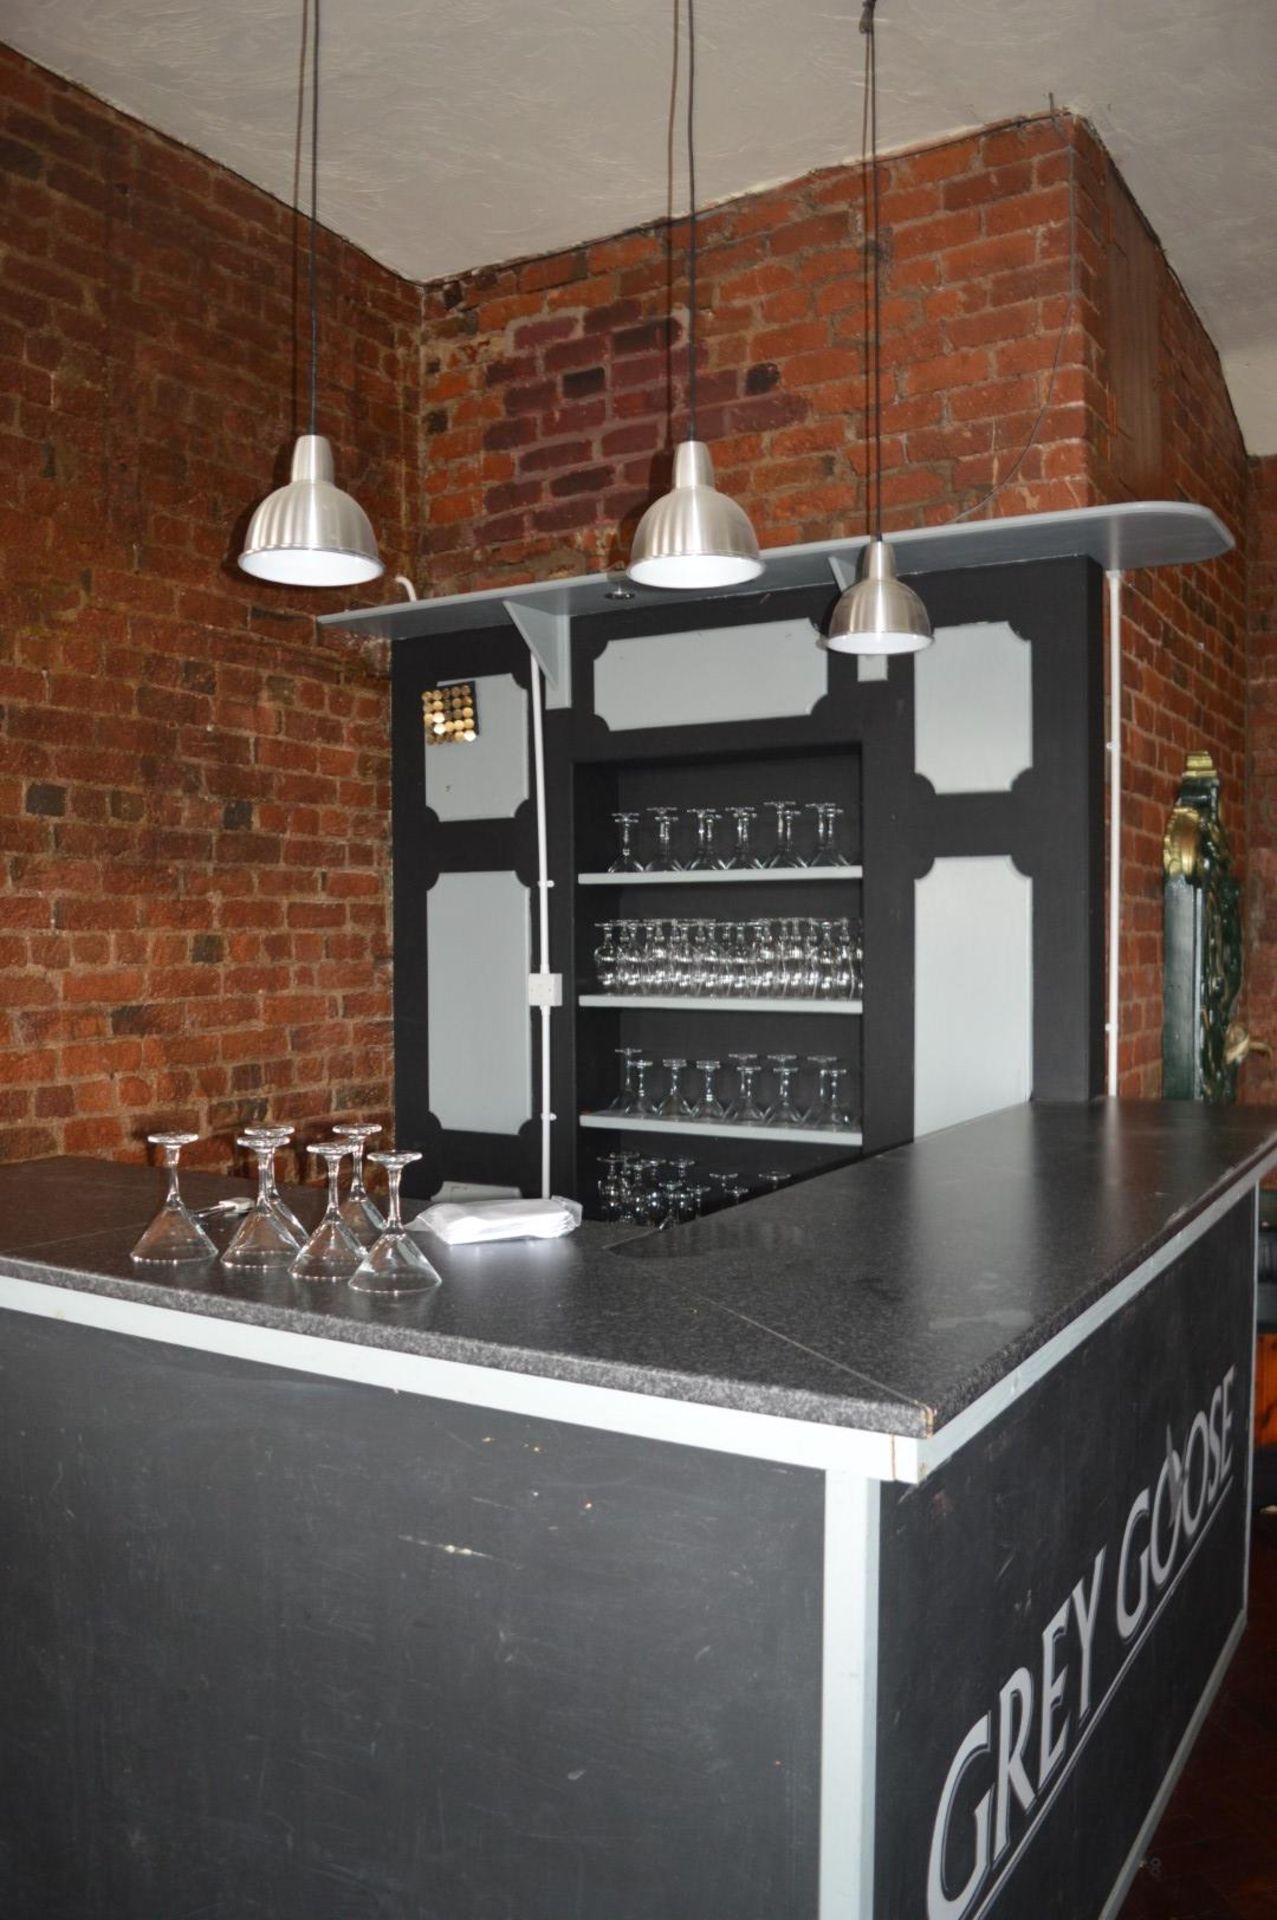 1 x Drinks Bar Finished in Black and Grey - Includes Backbar Shelf Unit and Three Pendant Lights - H - Image 9 of 13